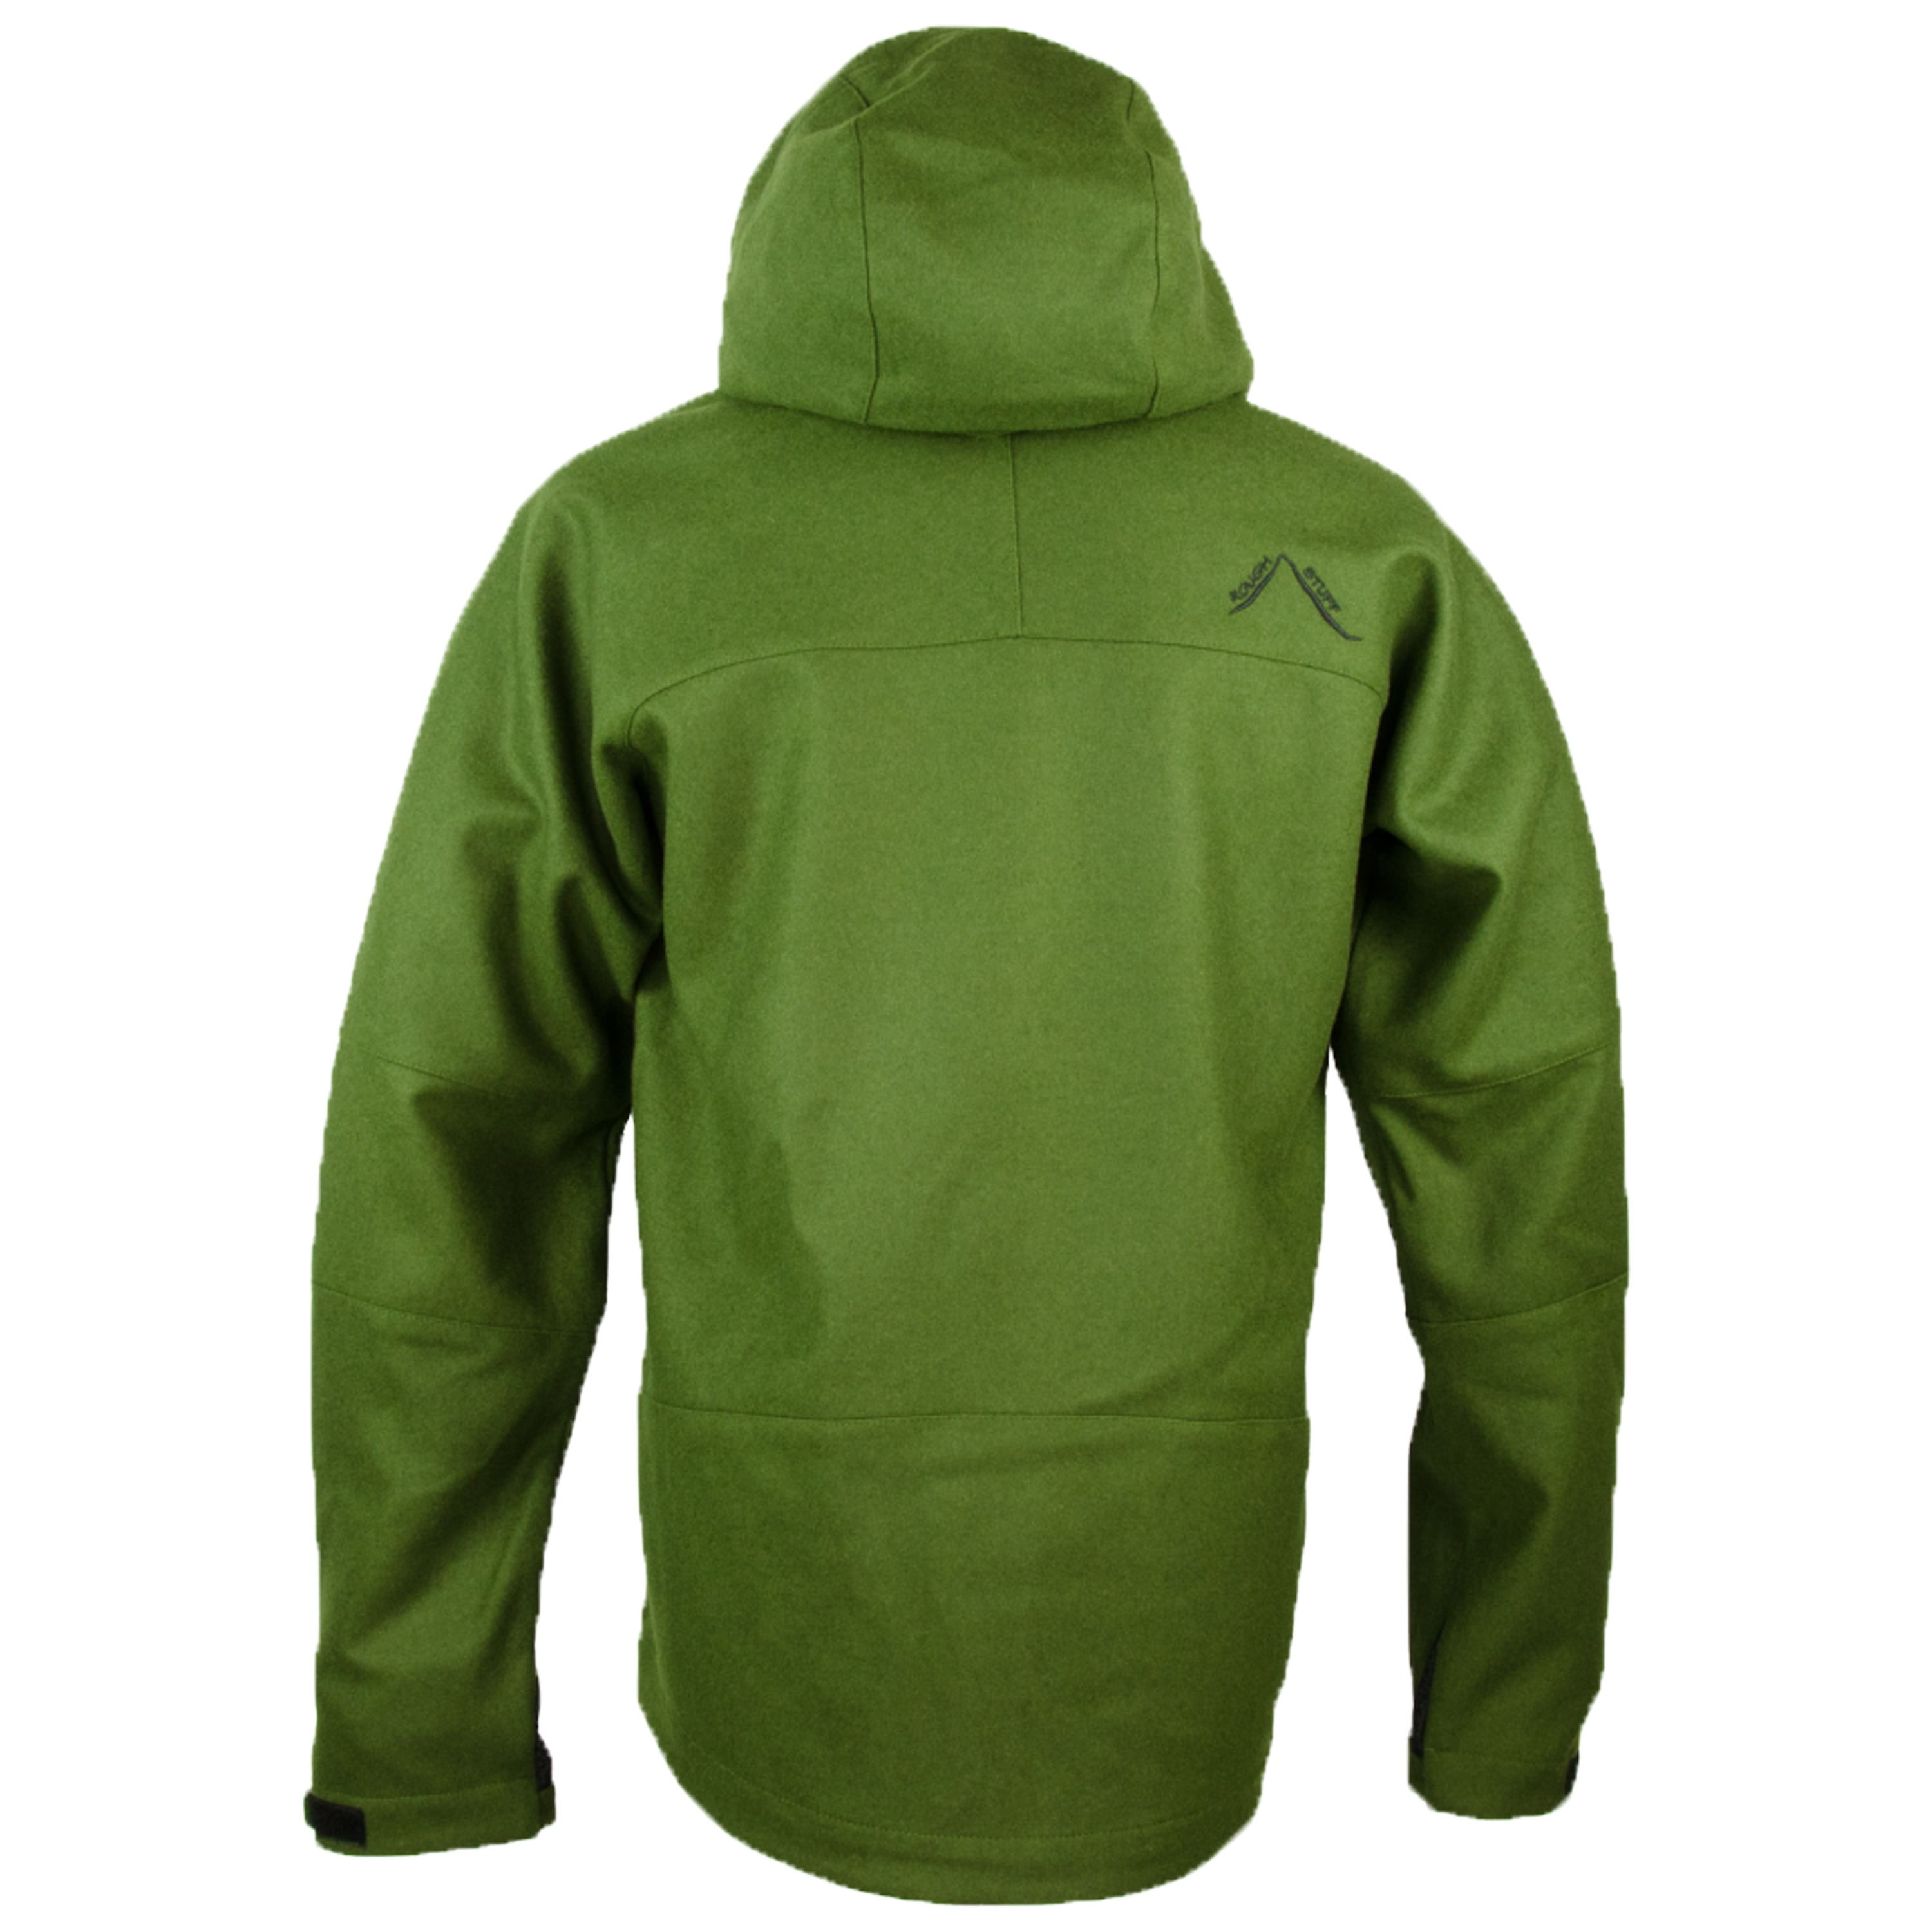 Purchase the Rough Stuff Jacket Deubelskerl green by ASMC